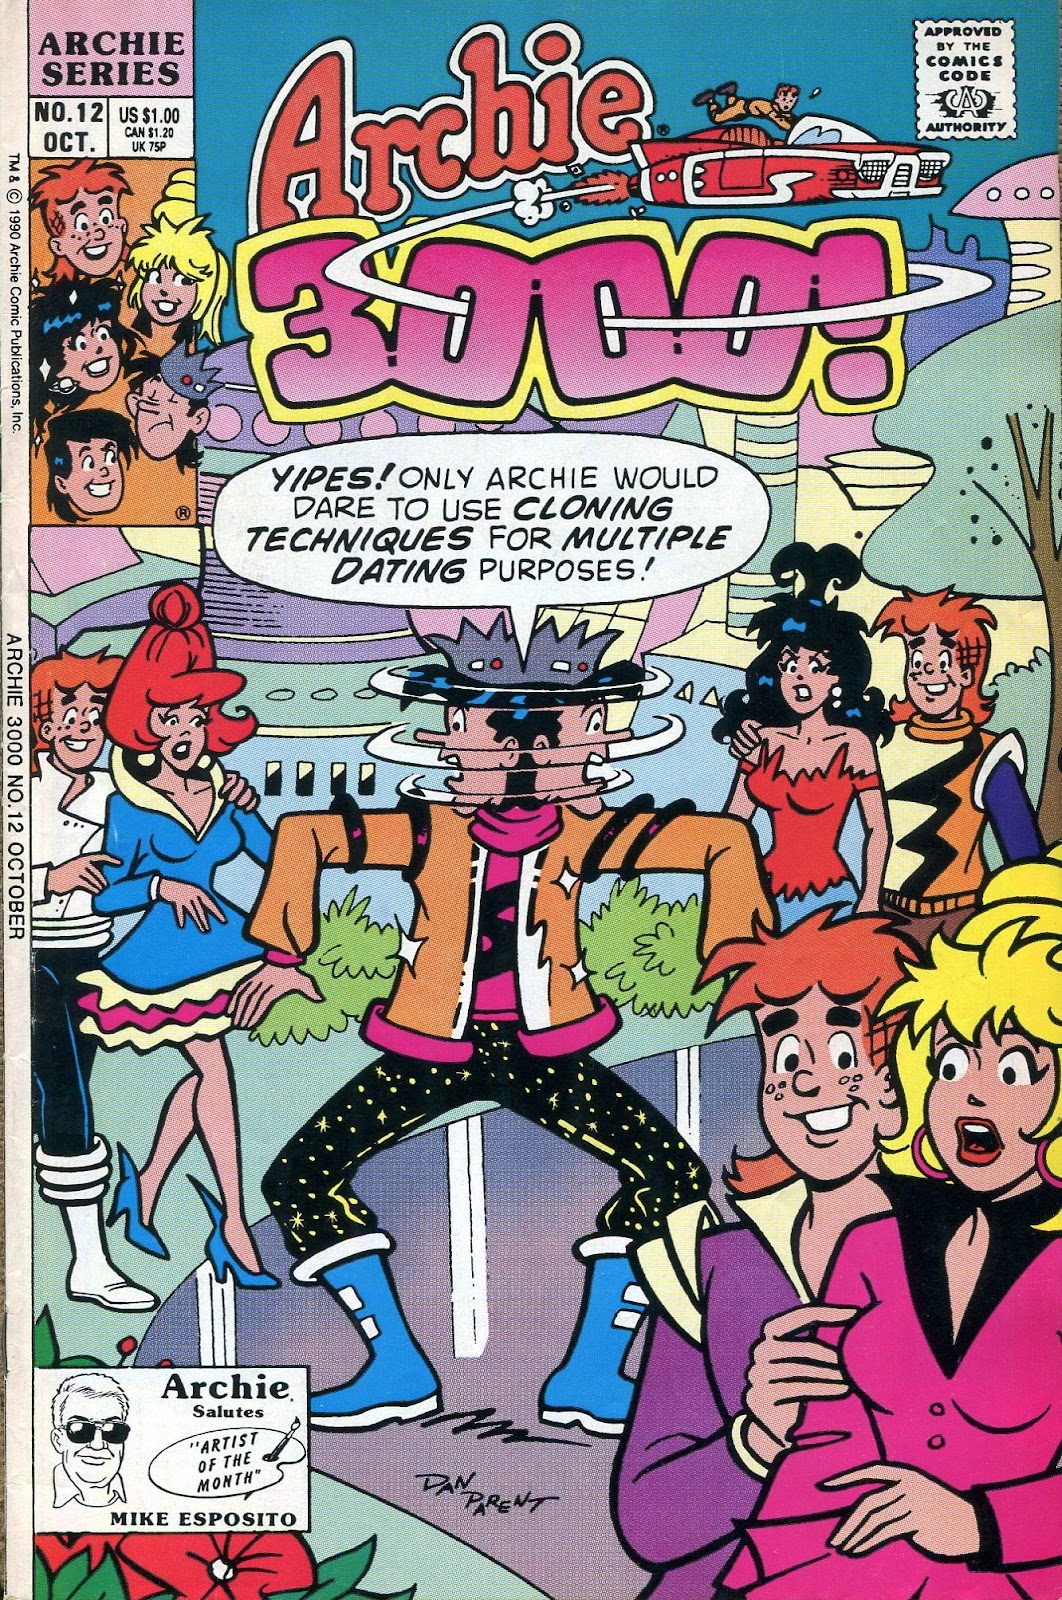 Archie 3000! (1989) issue 12 - Page 1